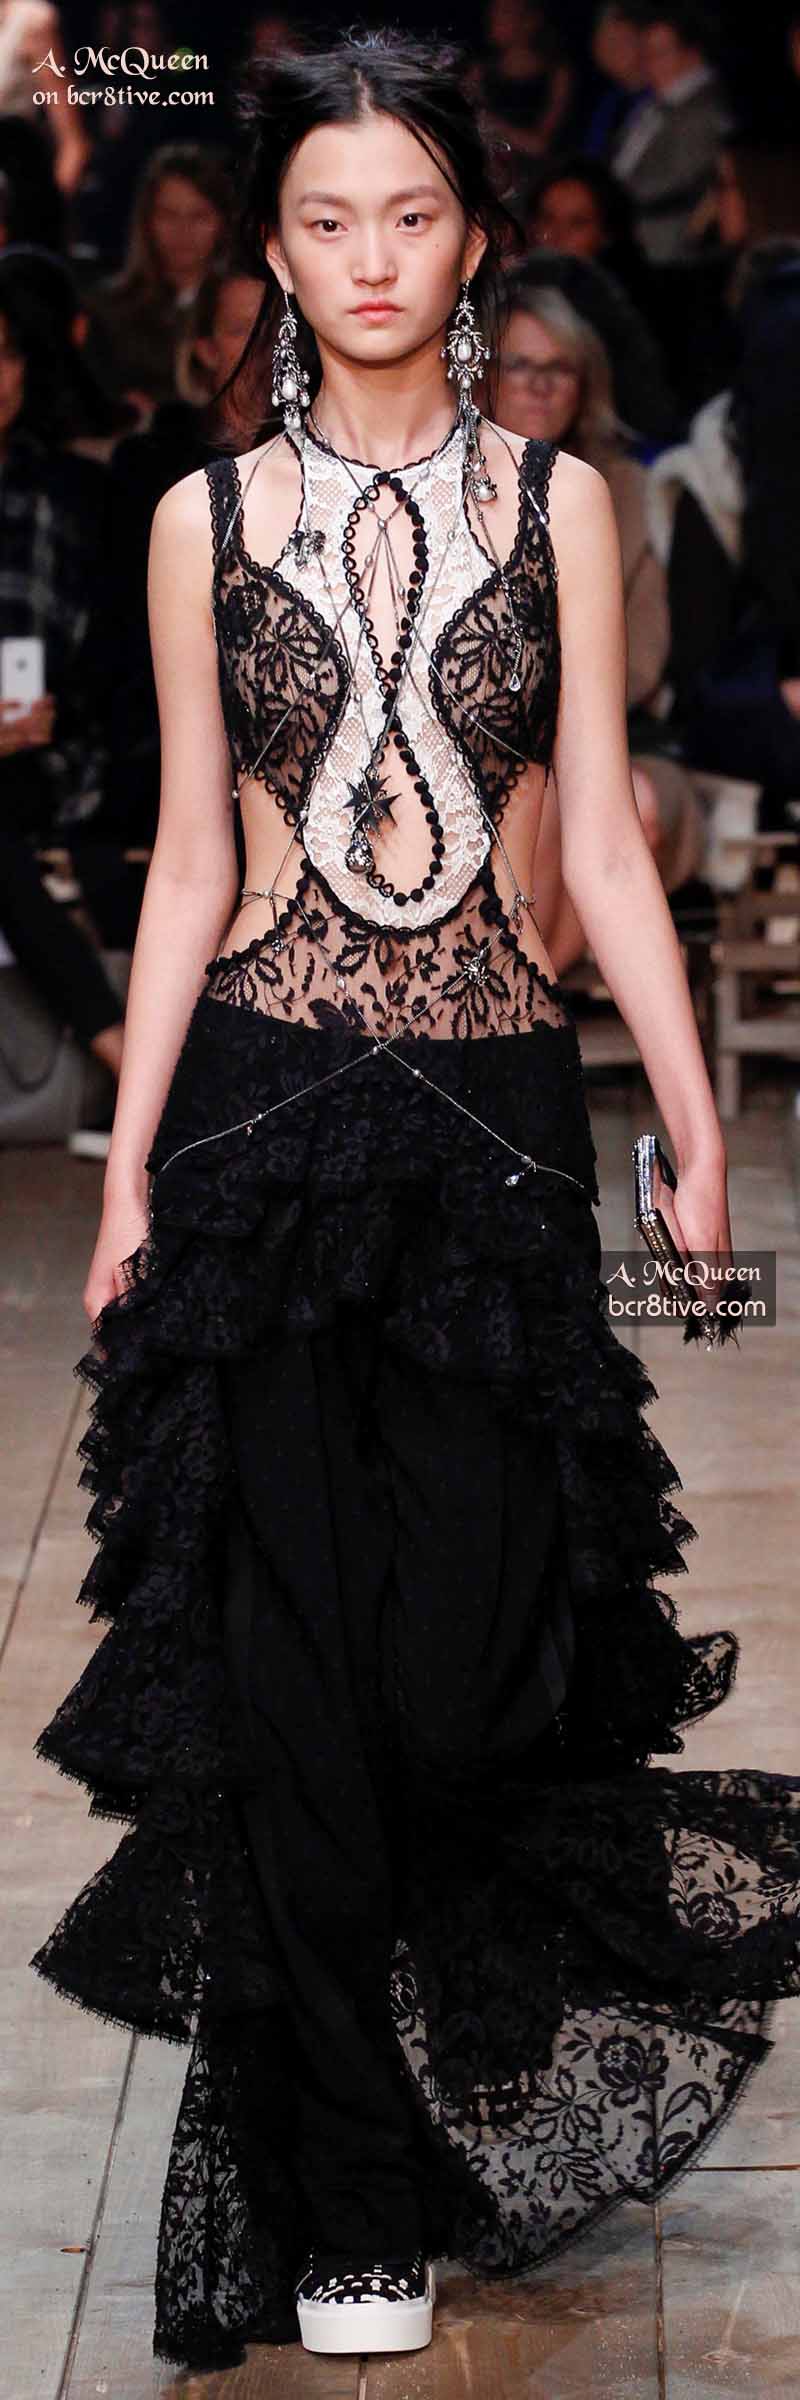 Lace and Ruffled Gown with Delicate Body Chain - The Best of Alexander McQueen 2016